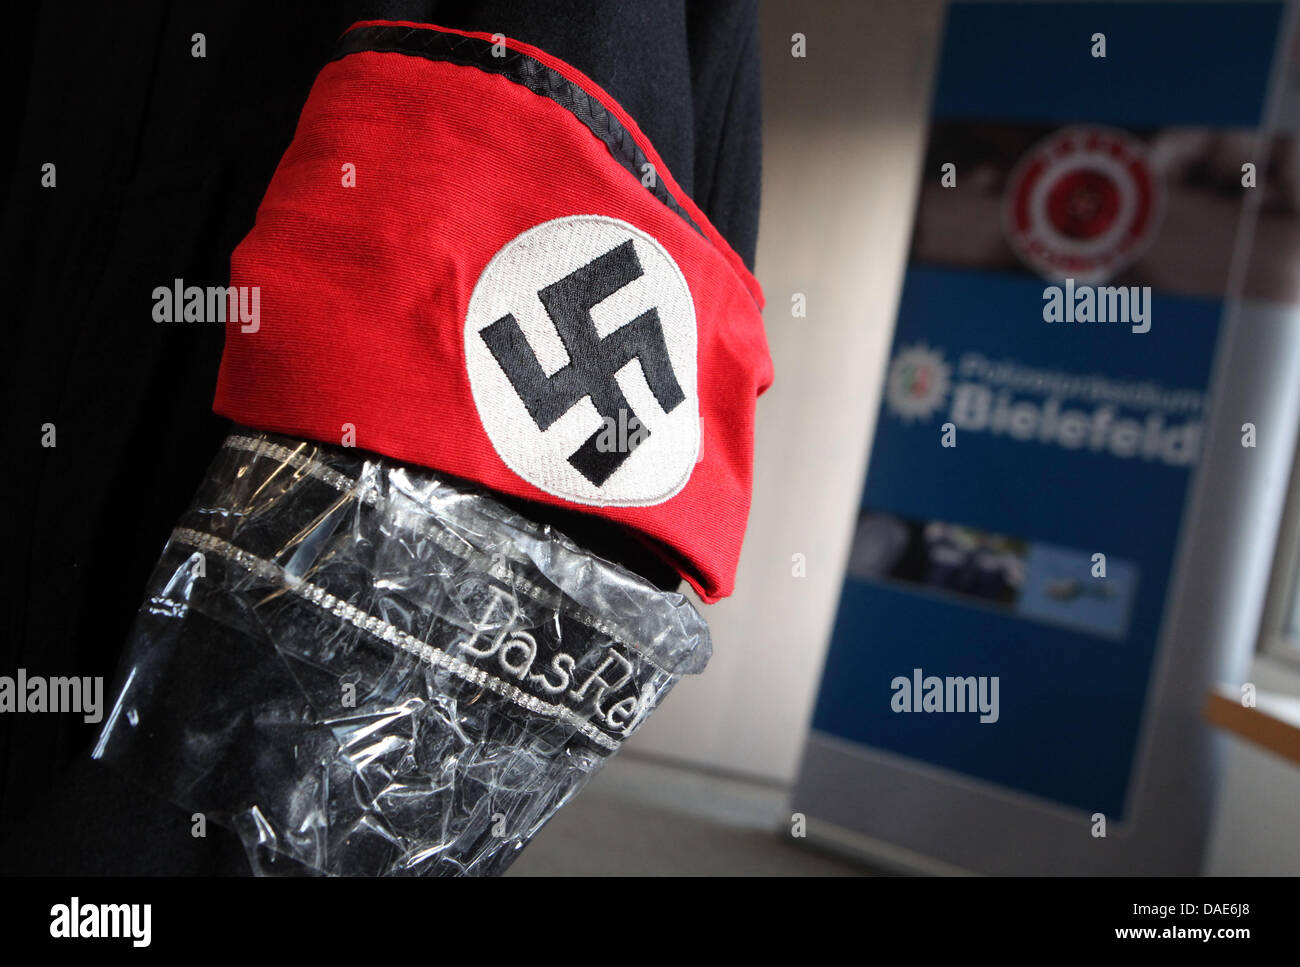 The jacket of the perpetrator with an armband and swastika symbol are  presented at a press conference in police headquarters in Bielefeld,  Germany, 15 November 2011. The police are reporting about the